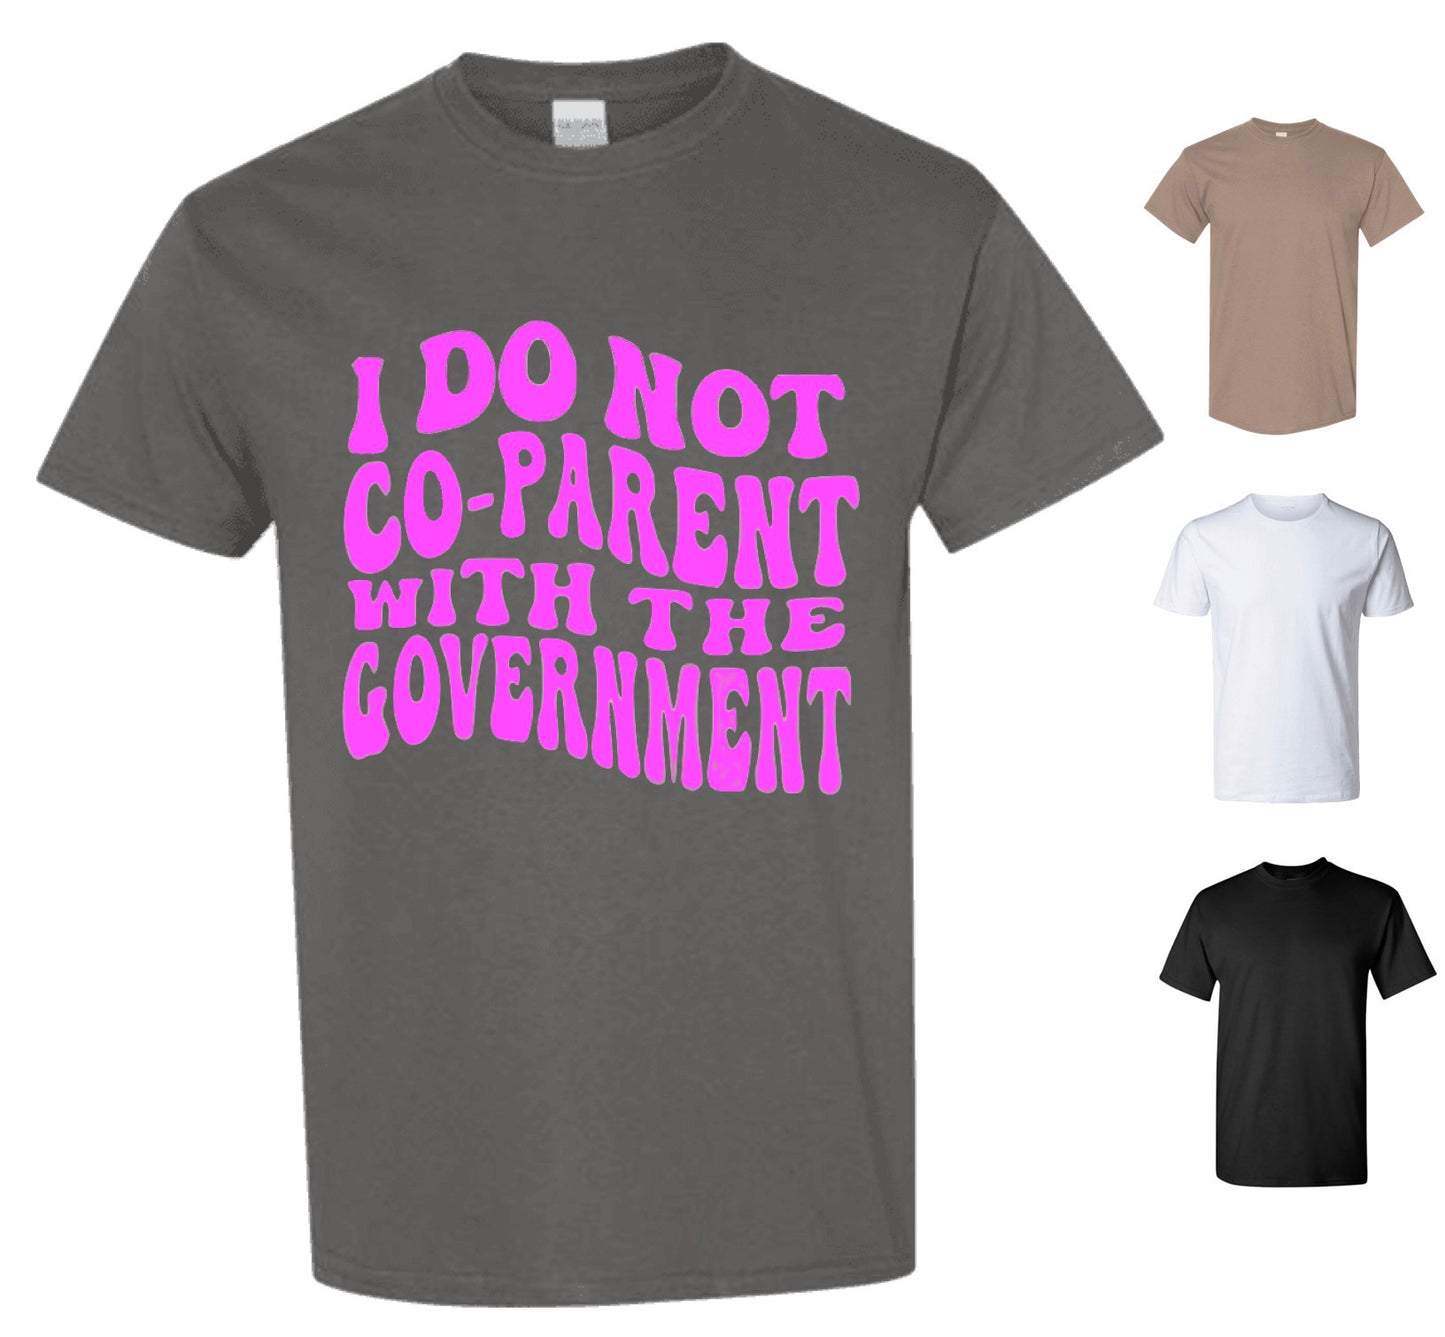 I Do Not Co-Parent With The Government (FREE Shipping)